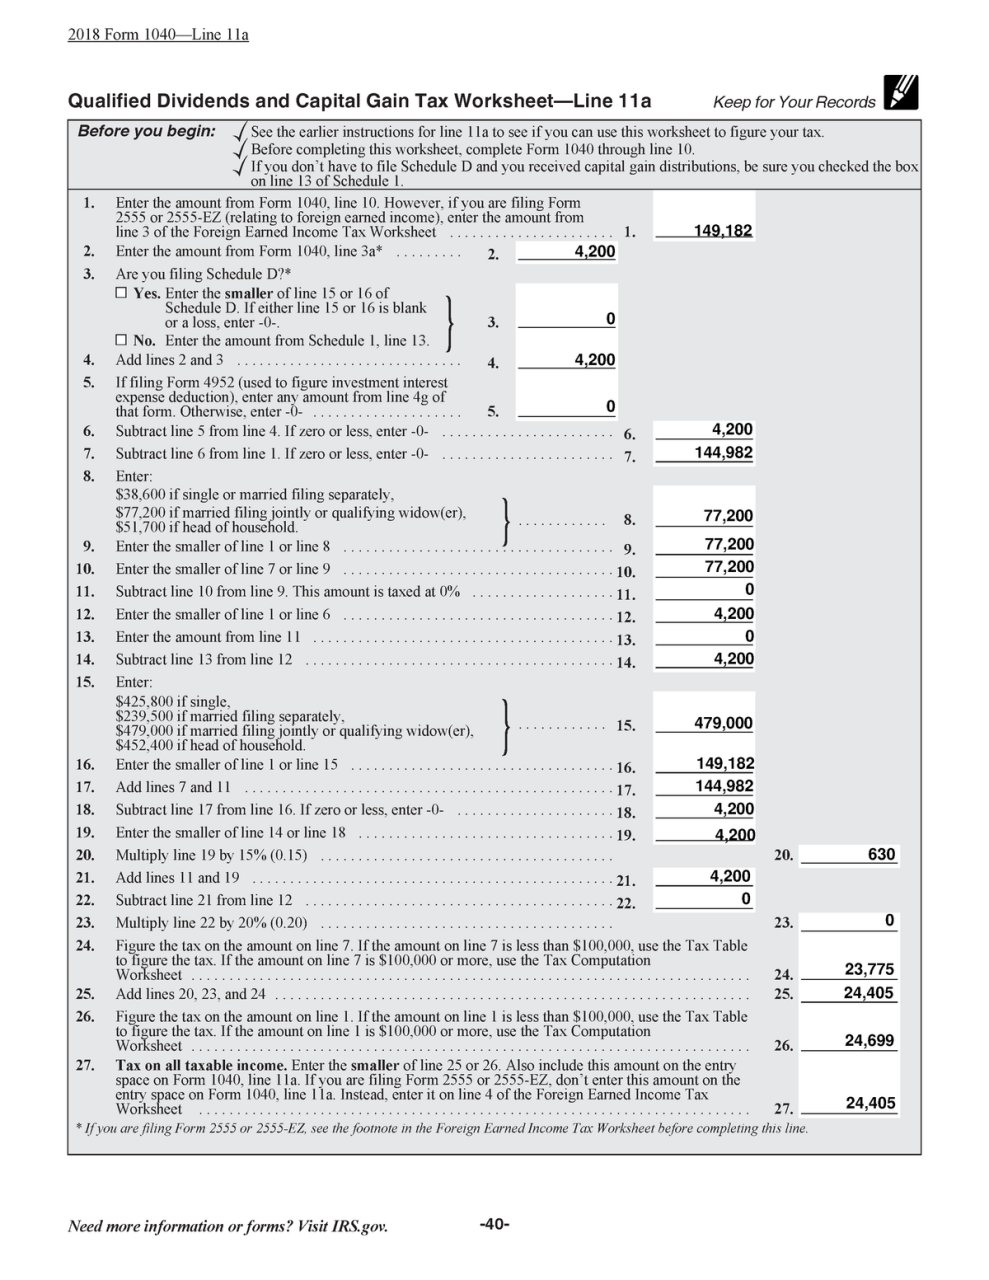 Qualified Dividends And Capital Gain Tax Worksheet 2019